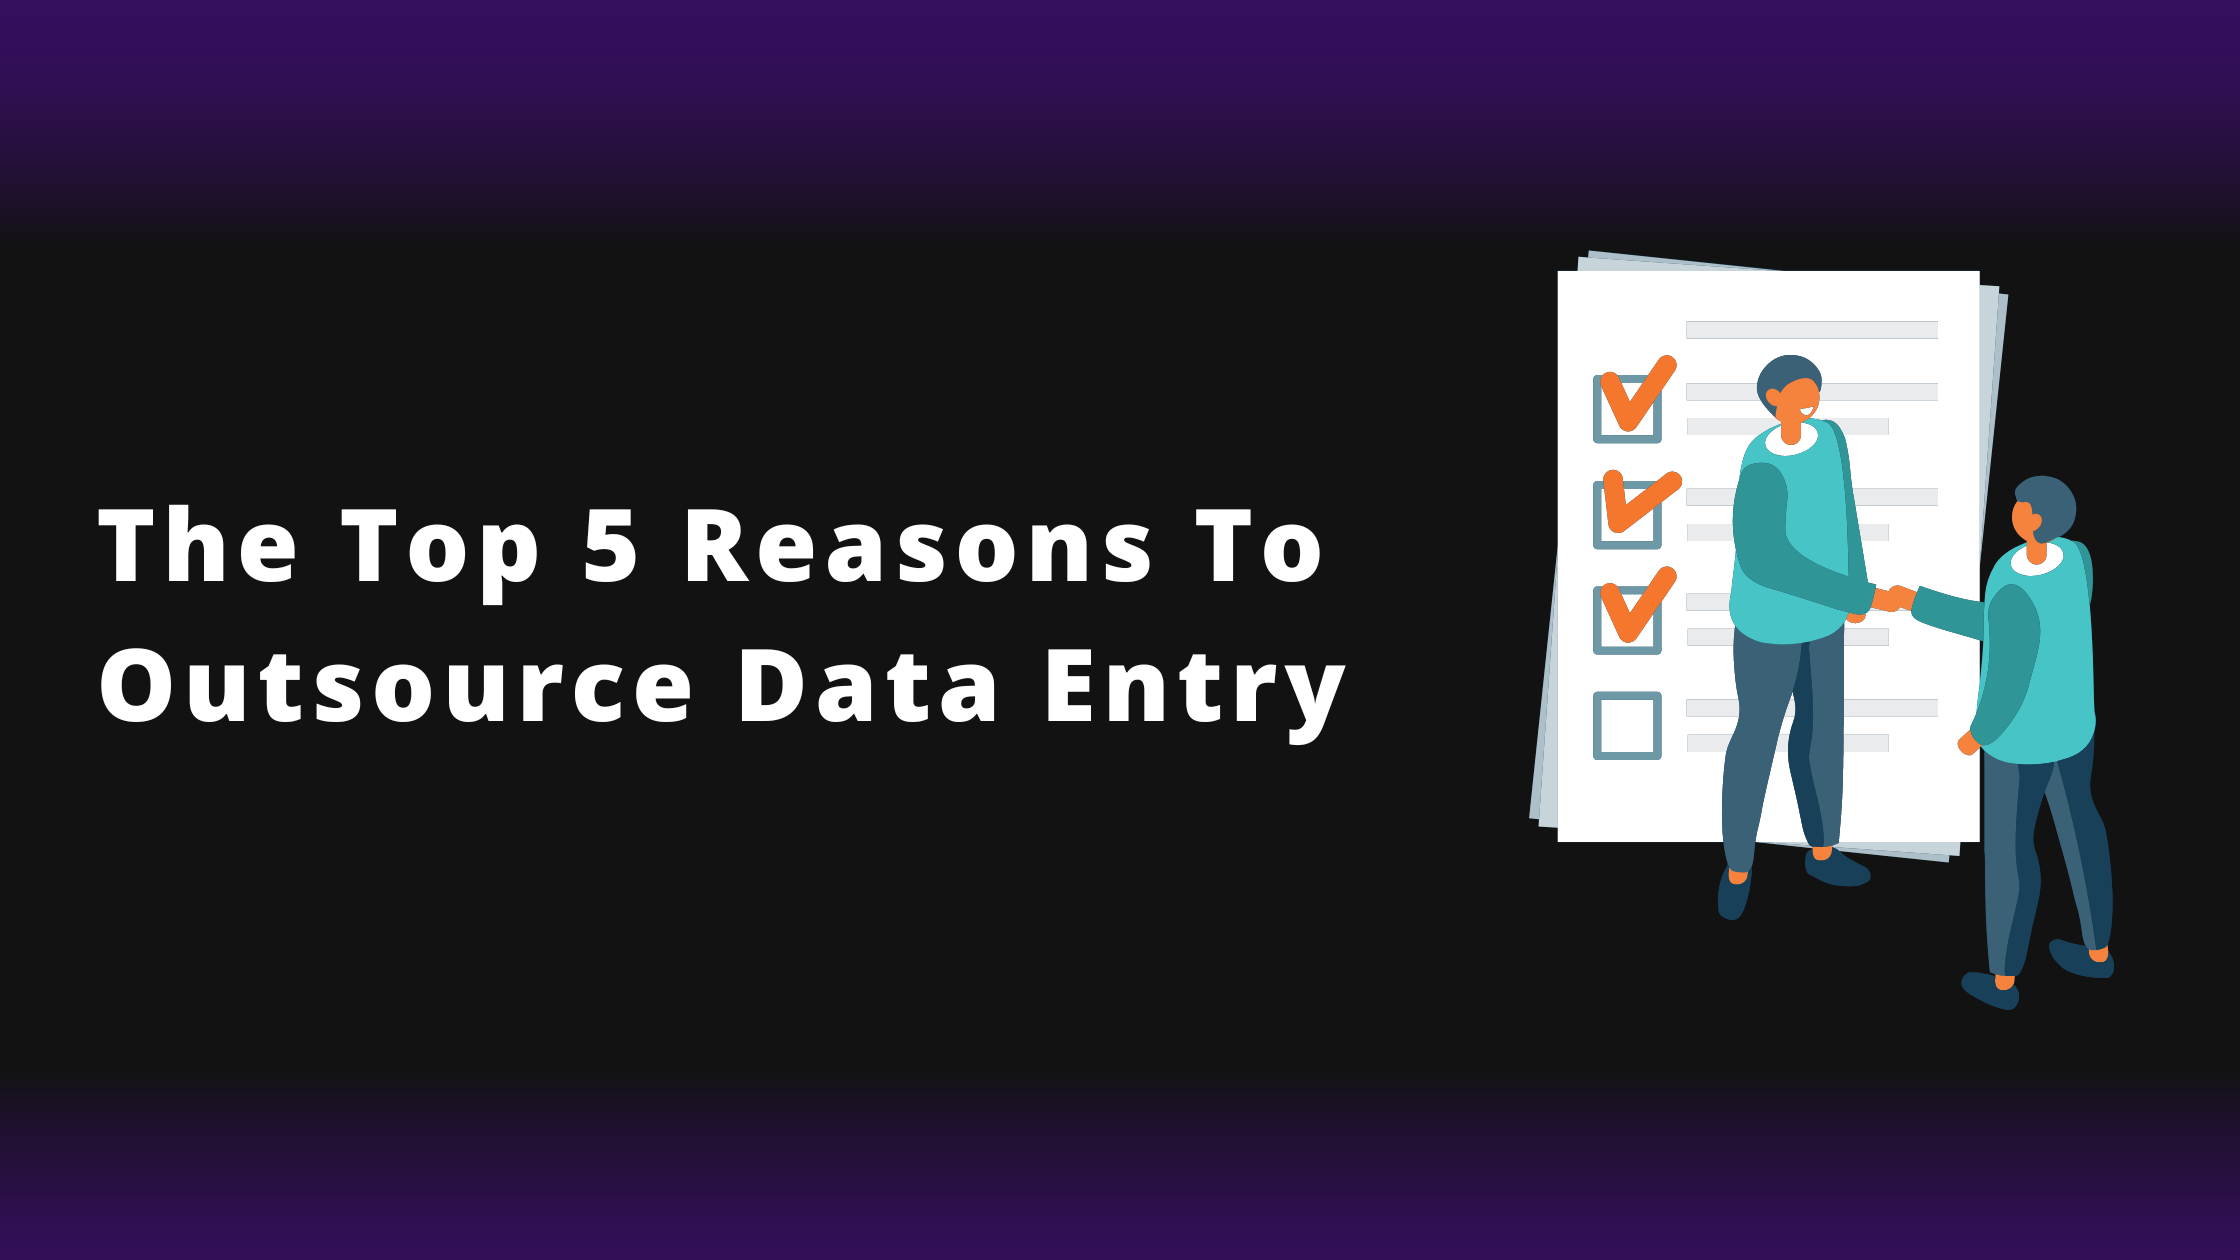 The Top 5 Reasons to Outsource Data Entry